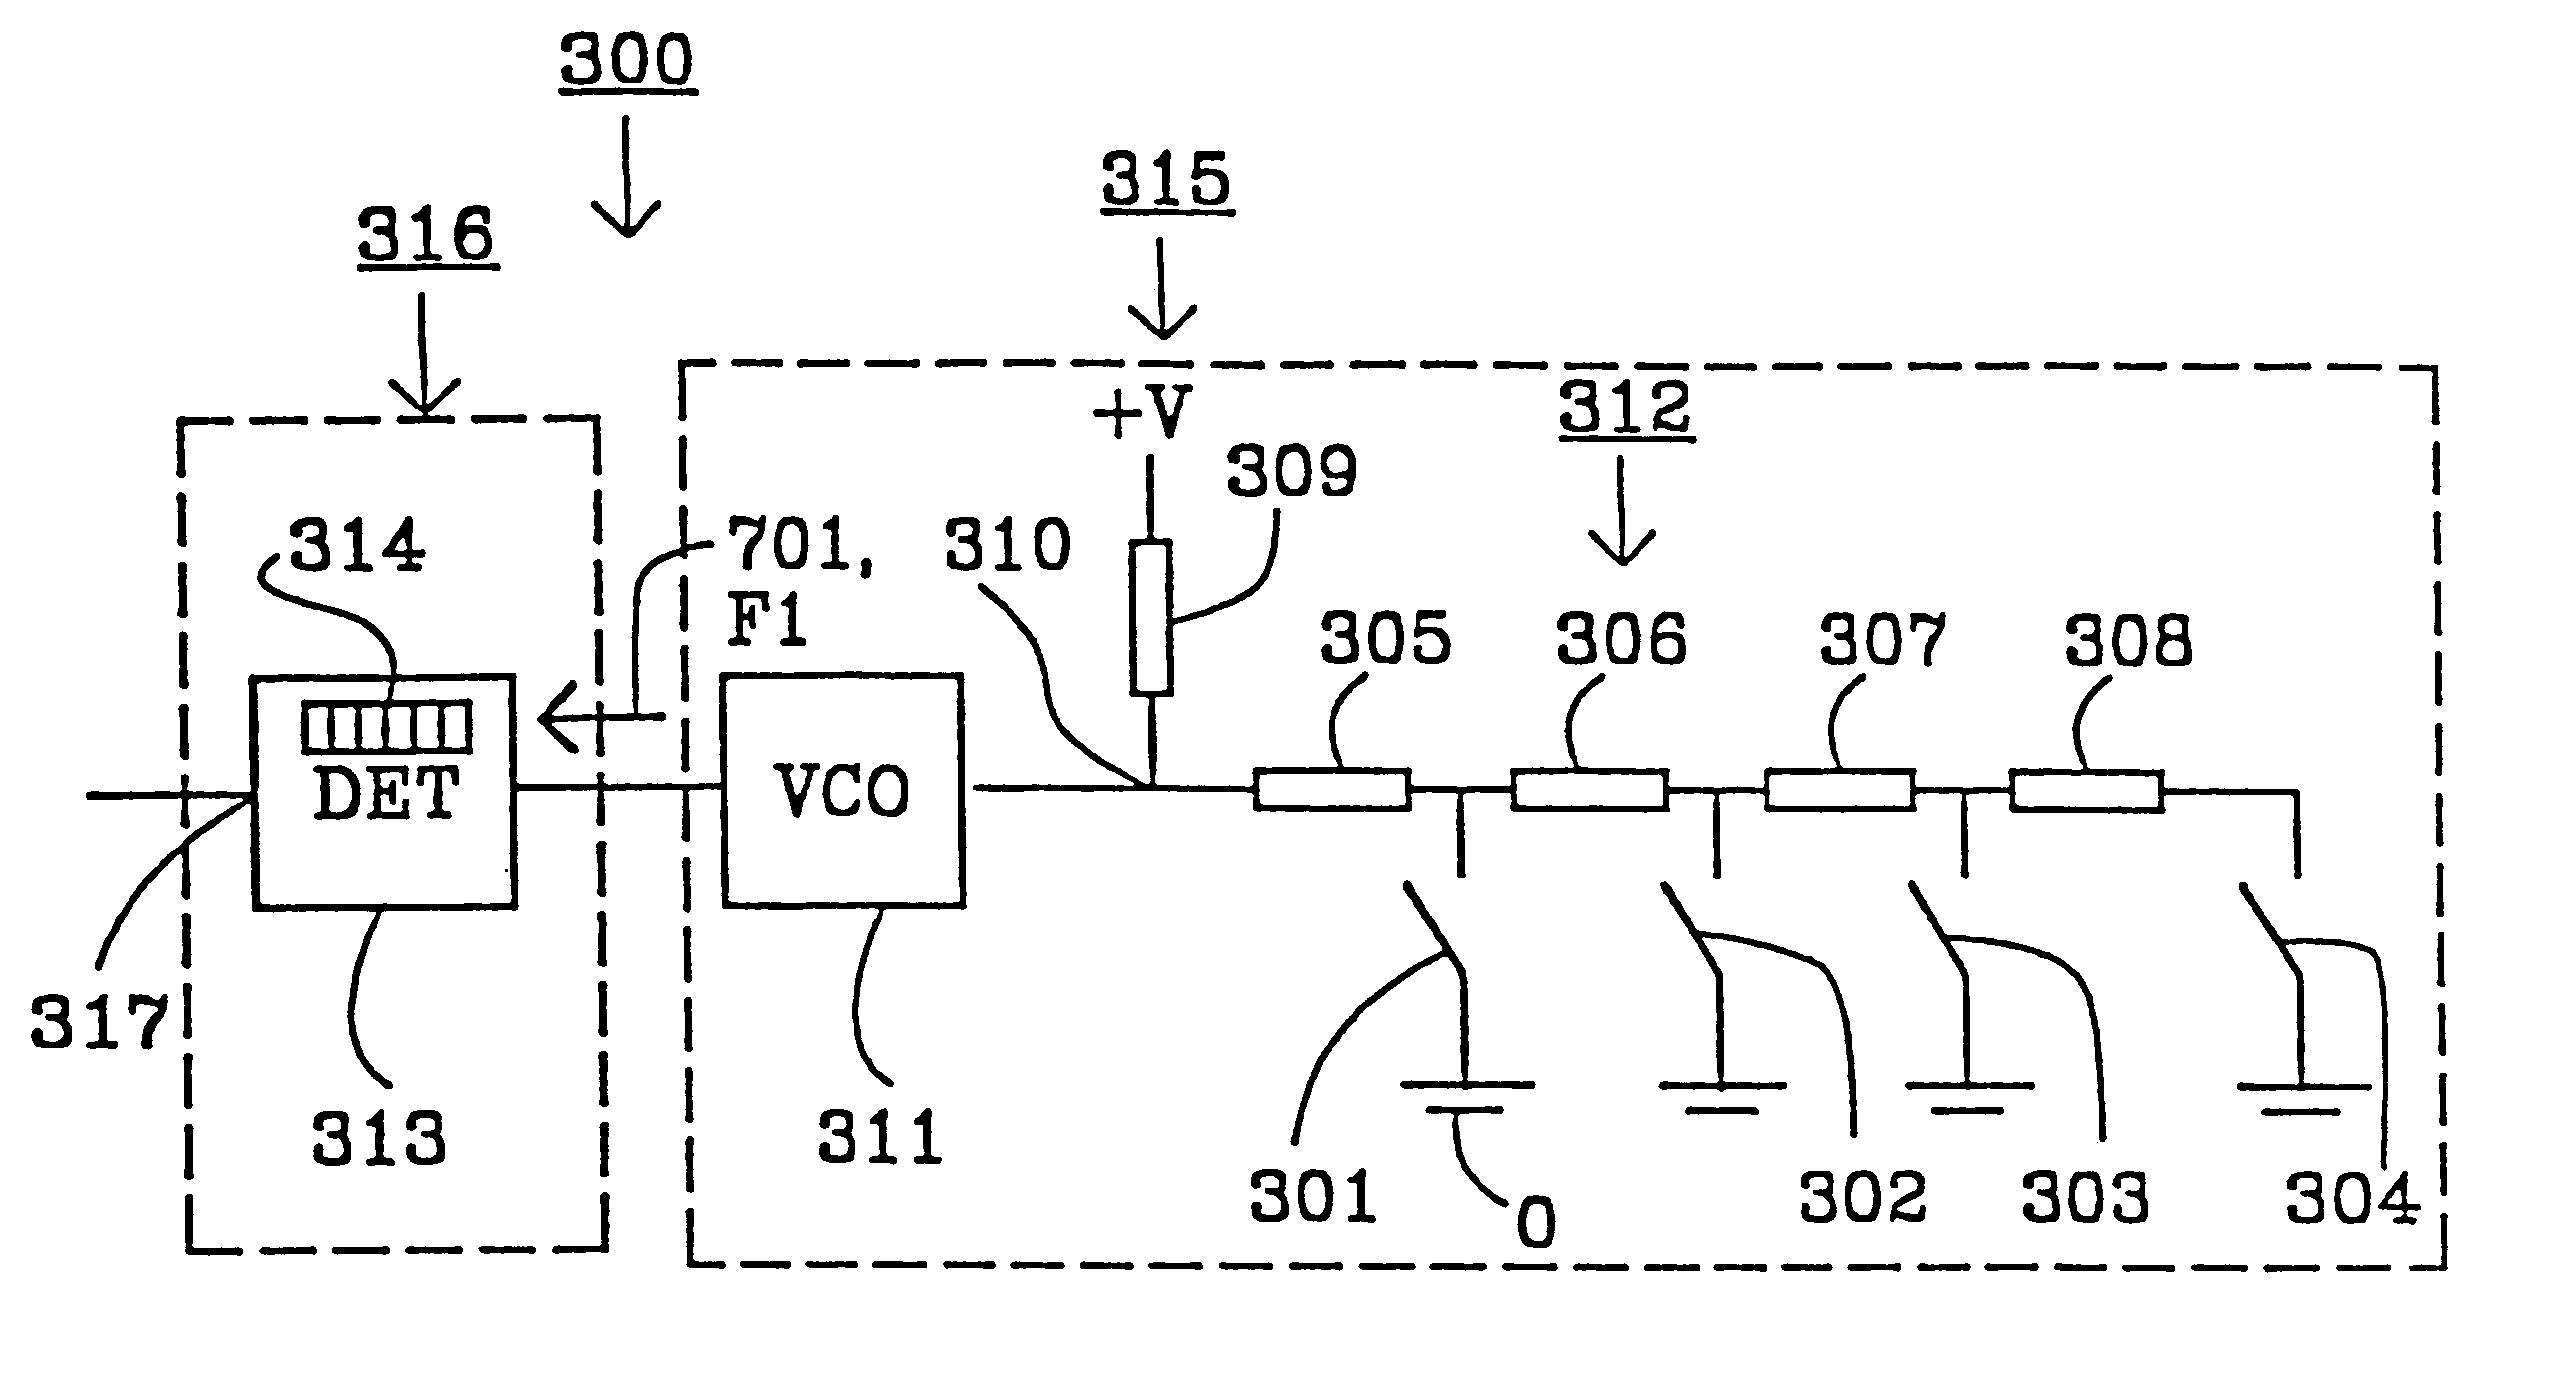 Apparatus and a method for keyboard encoding